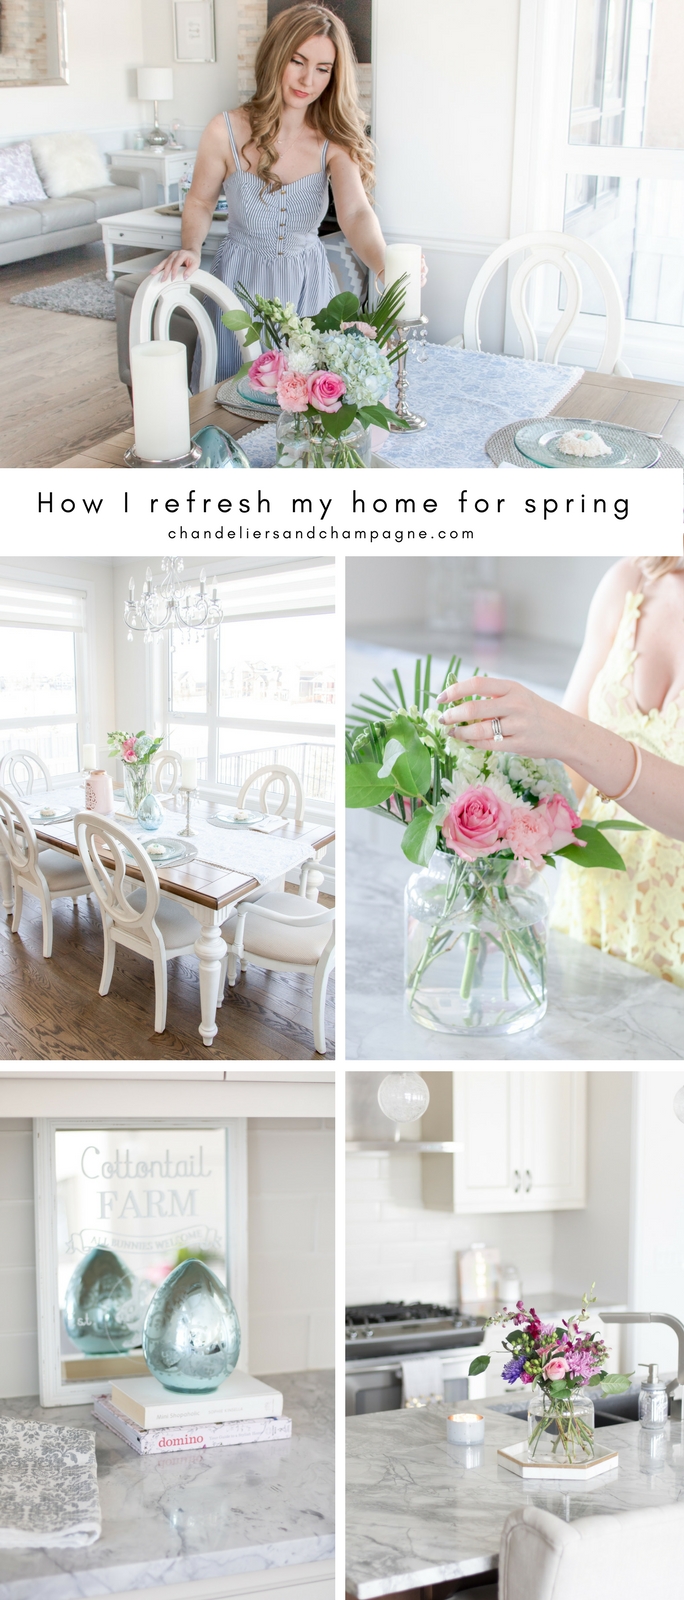 How I refresh my home for spring - tips on how to refresh your home, kitchen and dining table for a new season. Bright white homes. Easter decor. 